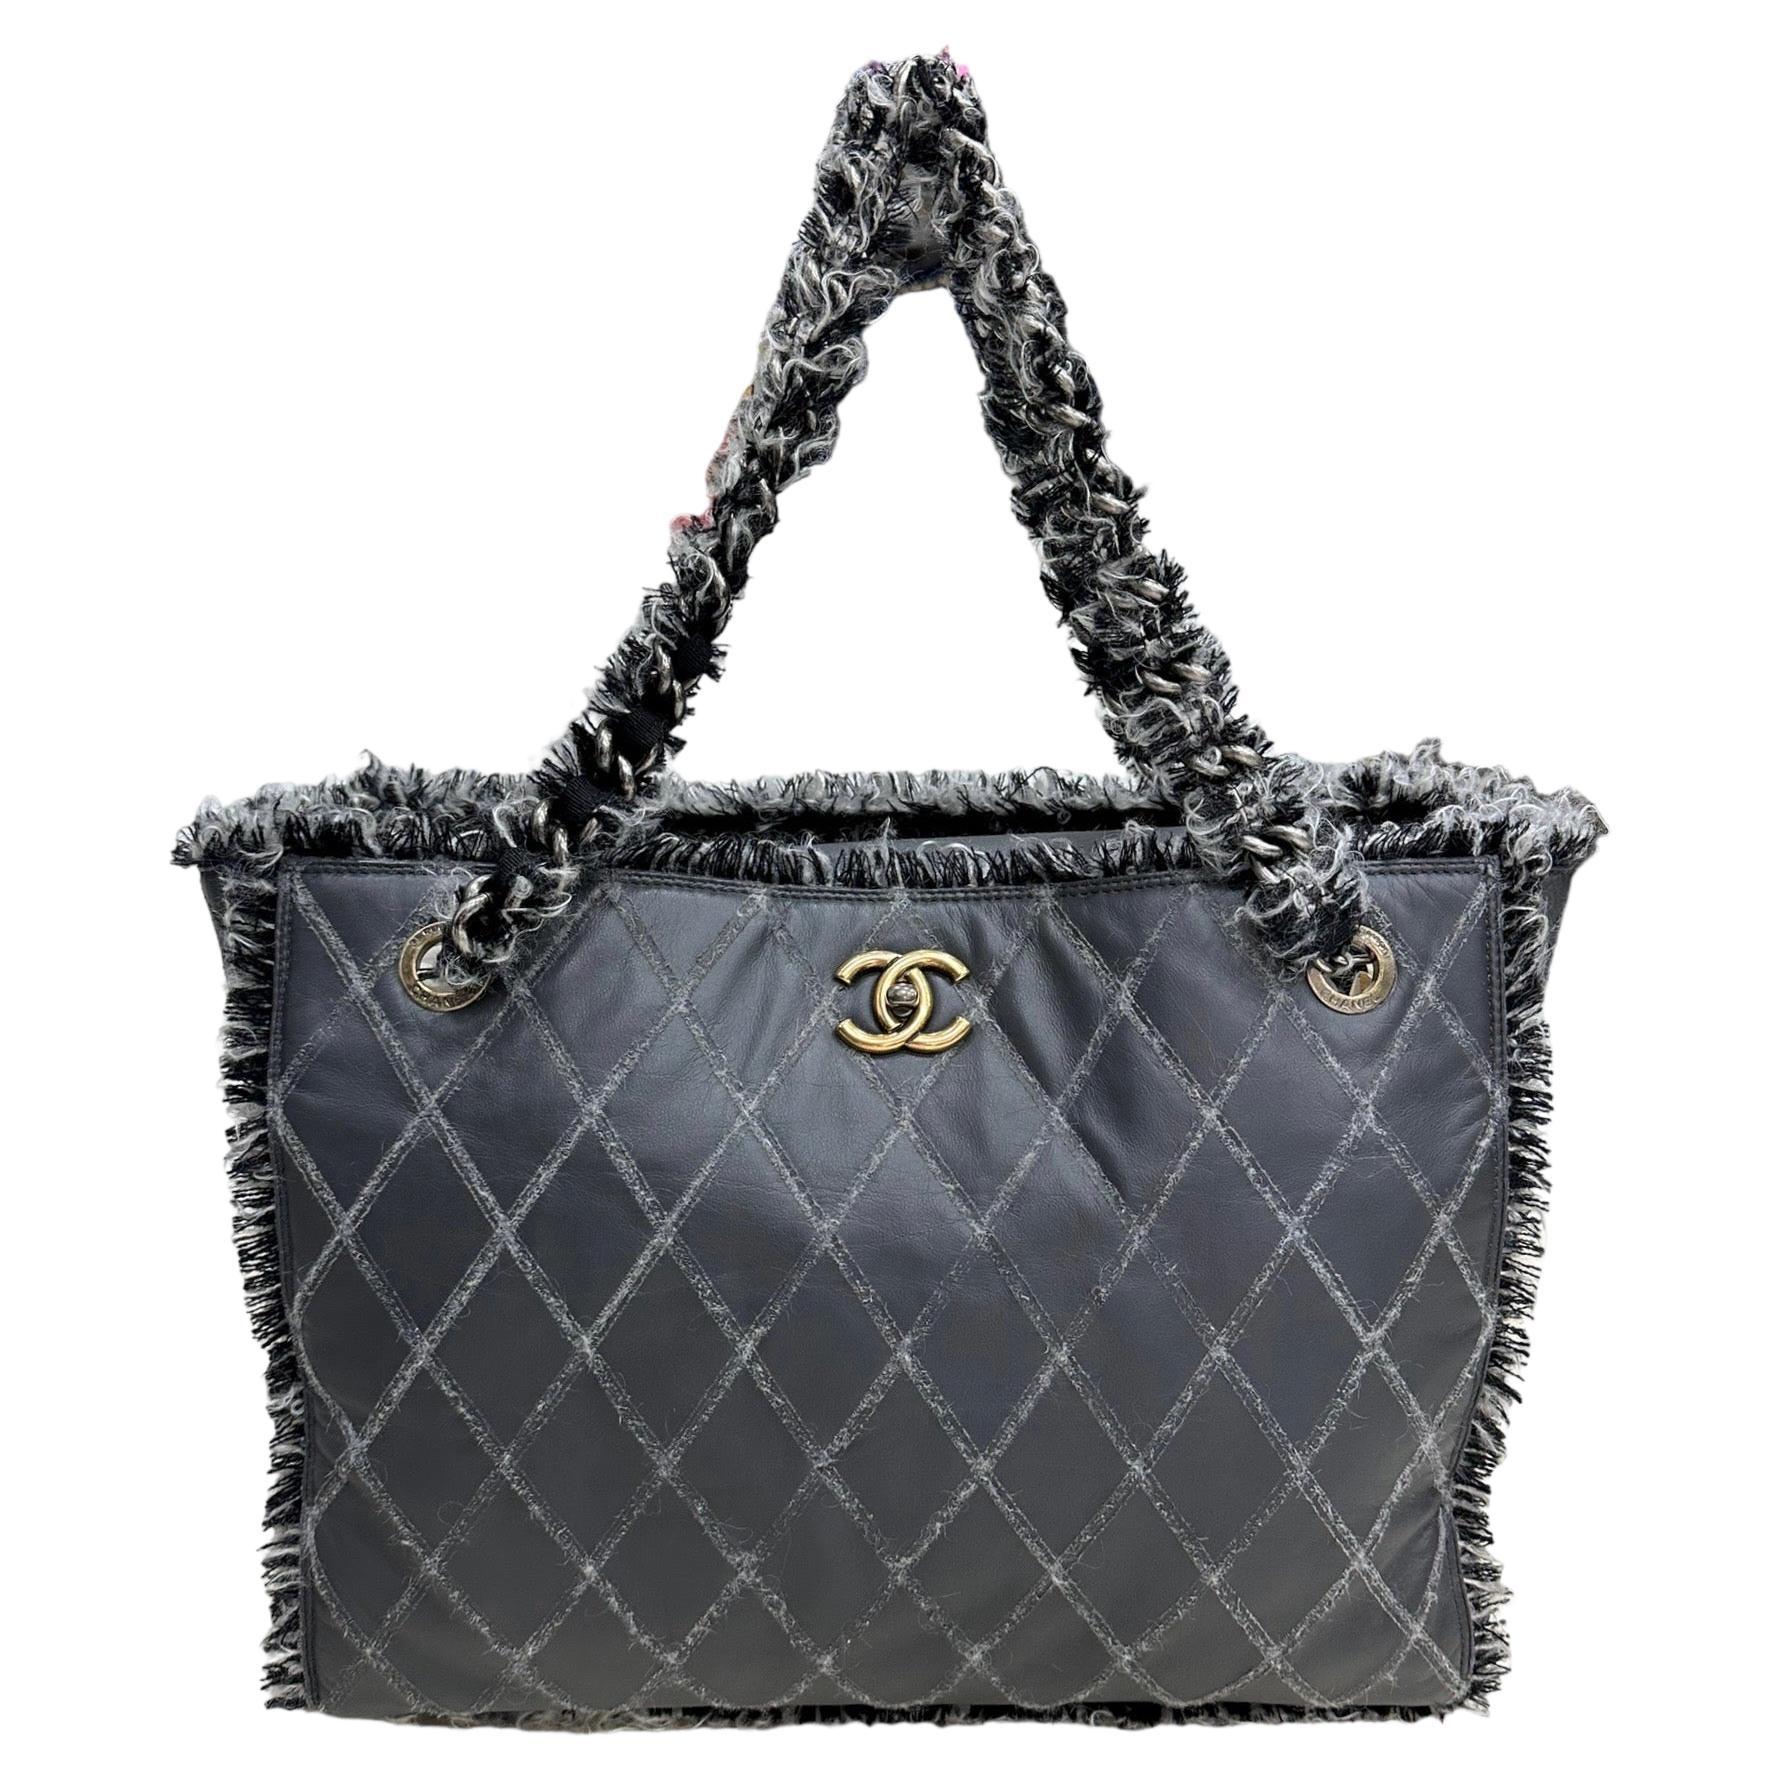 Which Chanel bags are a good investment? - Questions & Answers